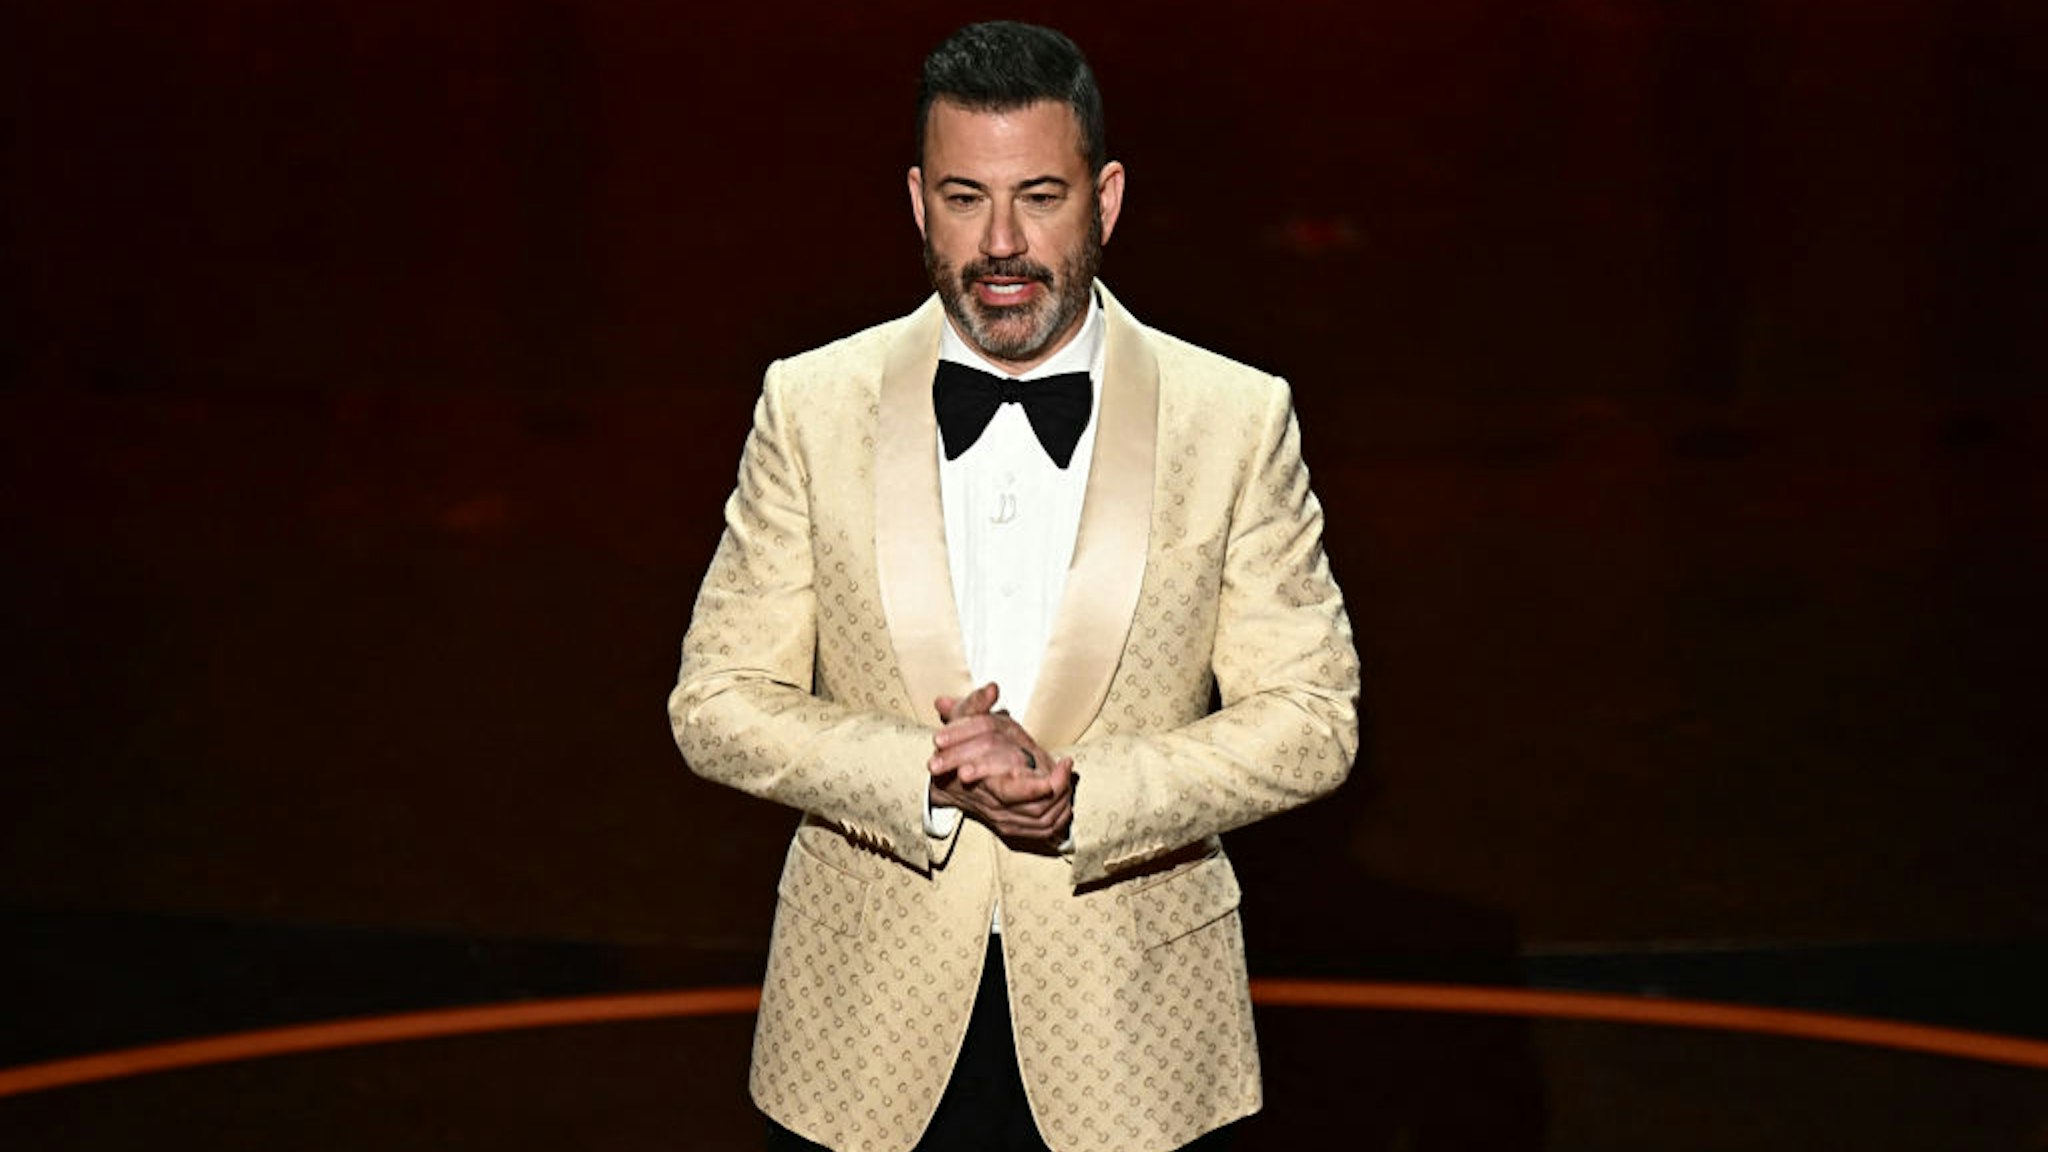 TV host Jimmy Kimmel speaks onstage during the 96th Annual Academy Awards at the Dolby Theatre in Hollywood, California on March 10, 2024. (Photo by Patrick T. Fallon / AFP) (Photo by PATRICK T. FALLON/AFP via Getty Images)